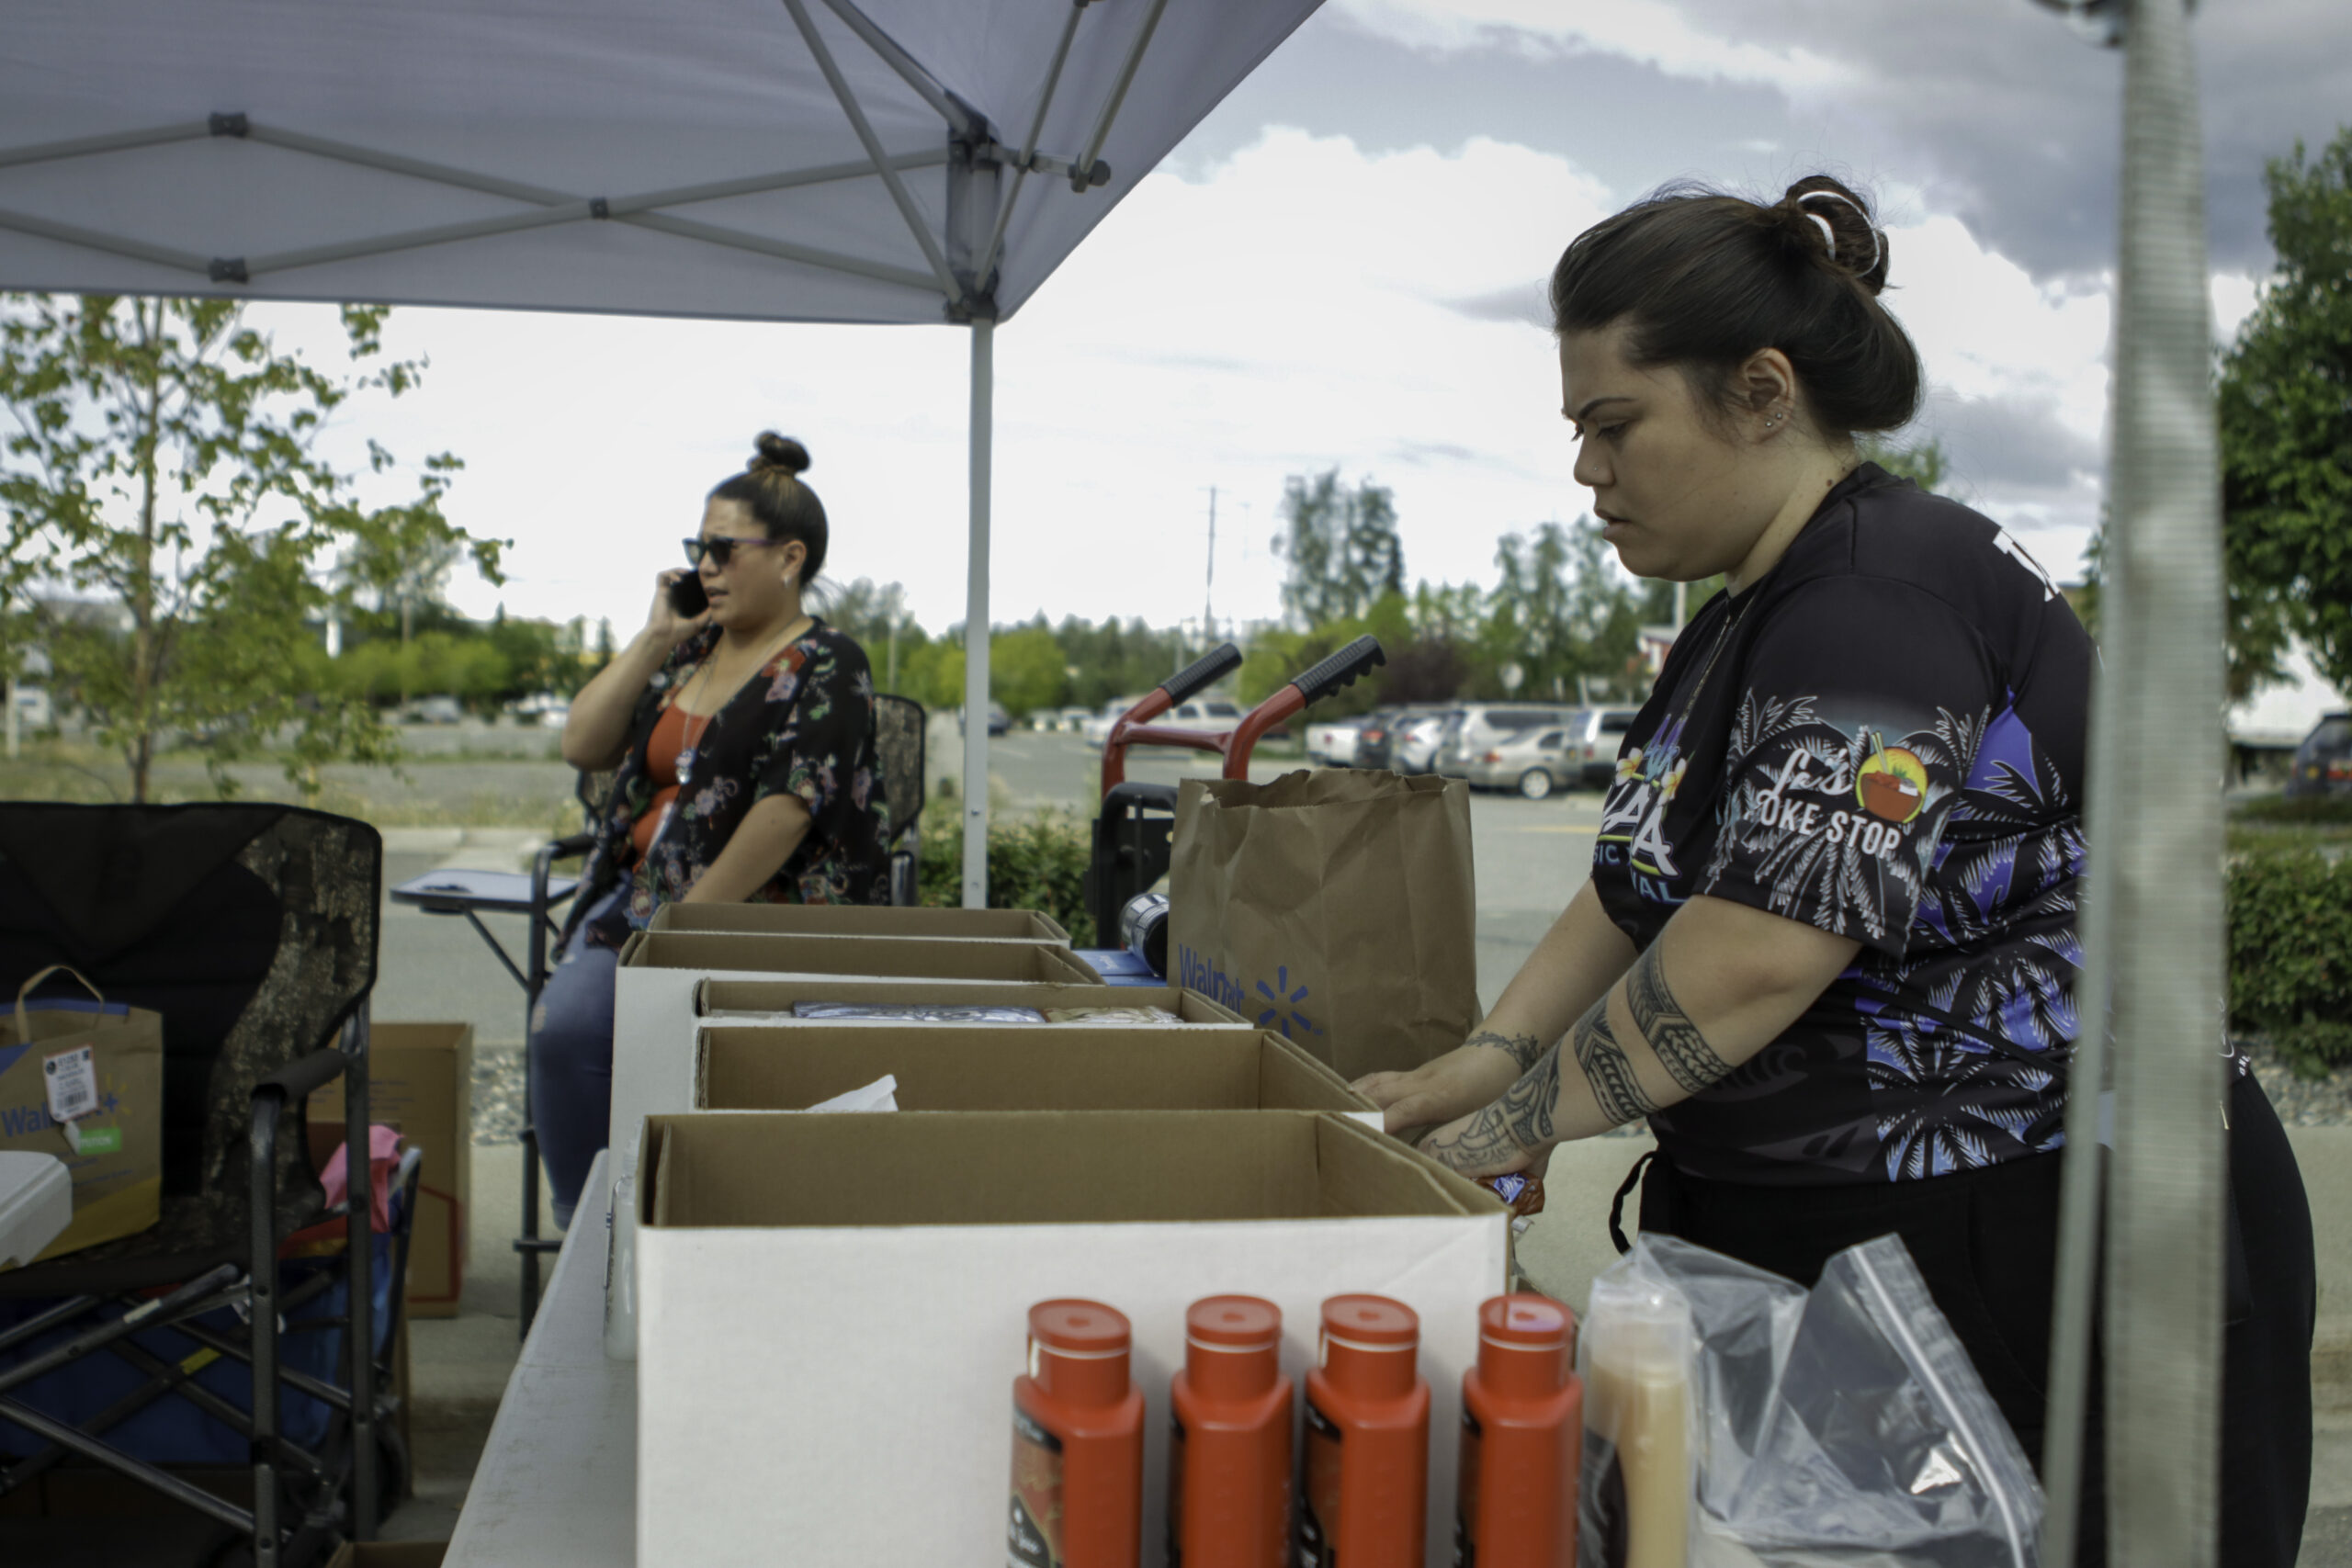 The woman on the right with a black shirt is putting shampoo bottles into a box. The woman on the left is sitting on a folding chair talking on a mobile phone.